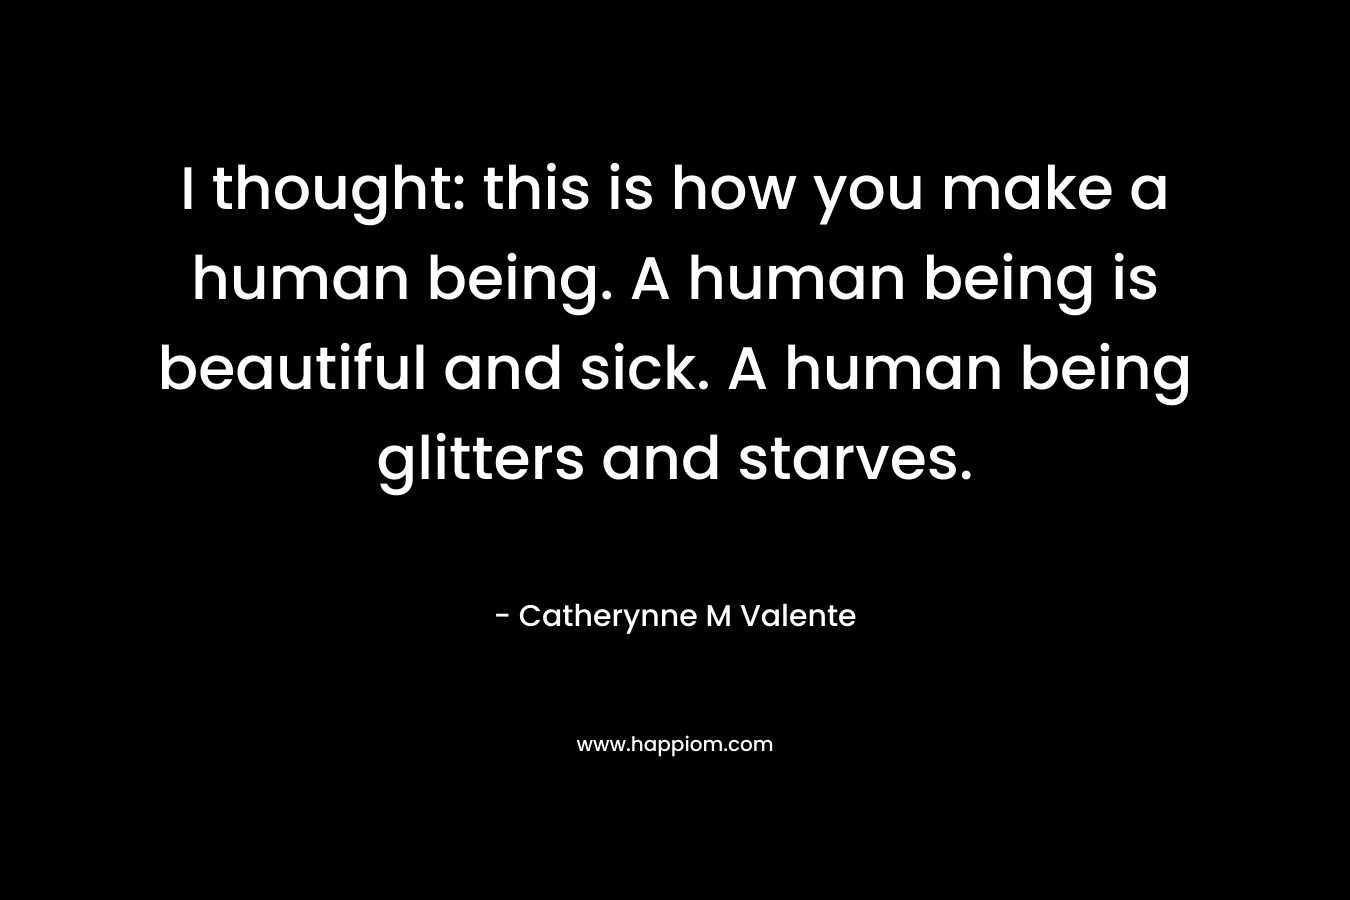 I thought: this is how you make a human being. A human being is beautiful and sick. A human being glitters and starves.